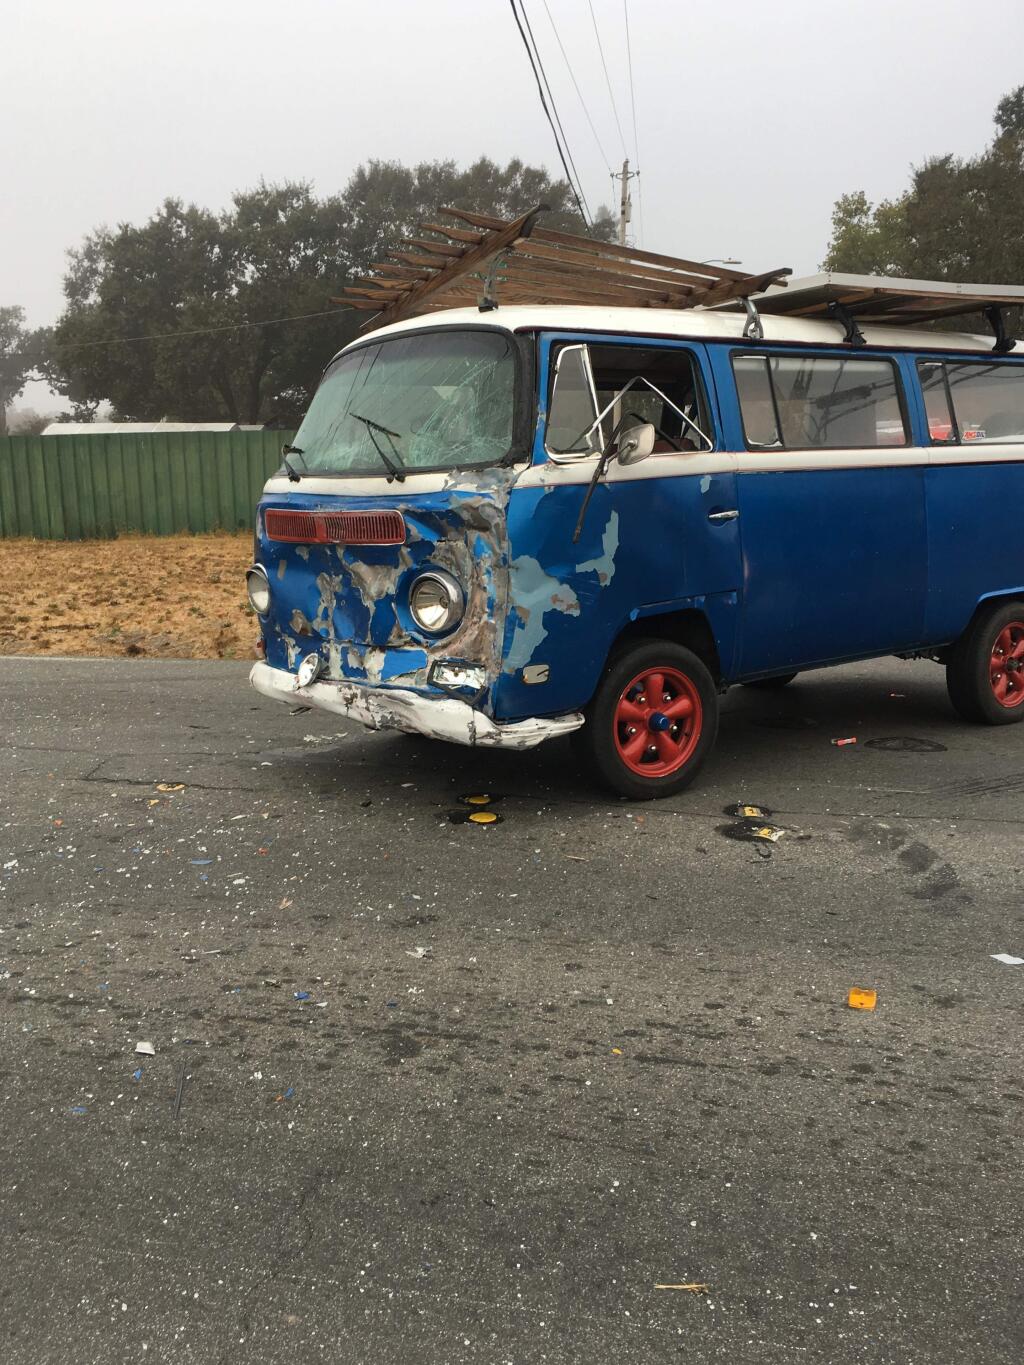 One person was injured in a crash in southwest Santa Rosa on Tuesday, Oct. 15, 2019. (SANTA ROSA POLICE DEPARTMENT)